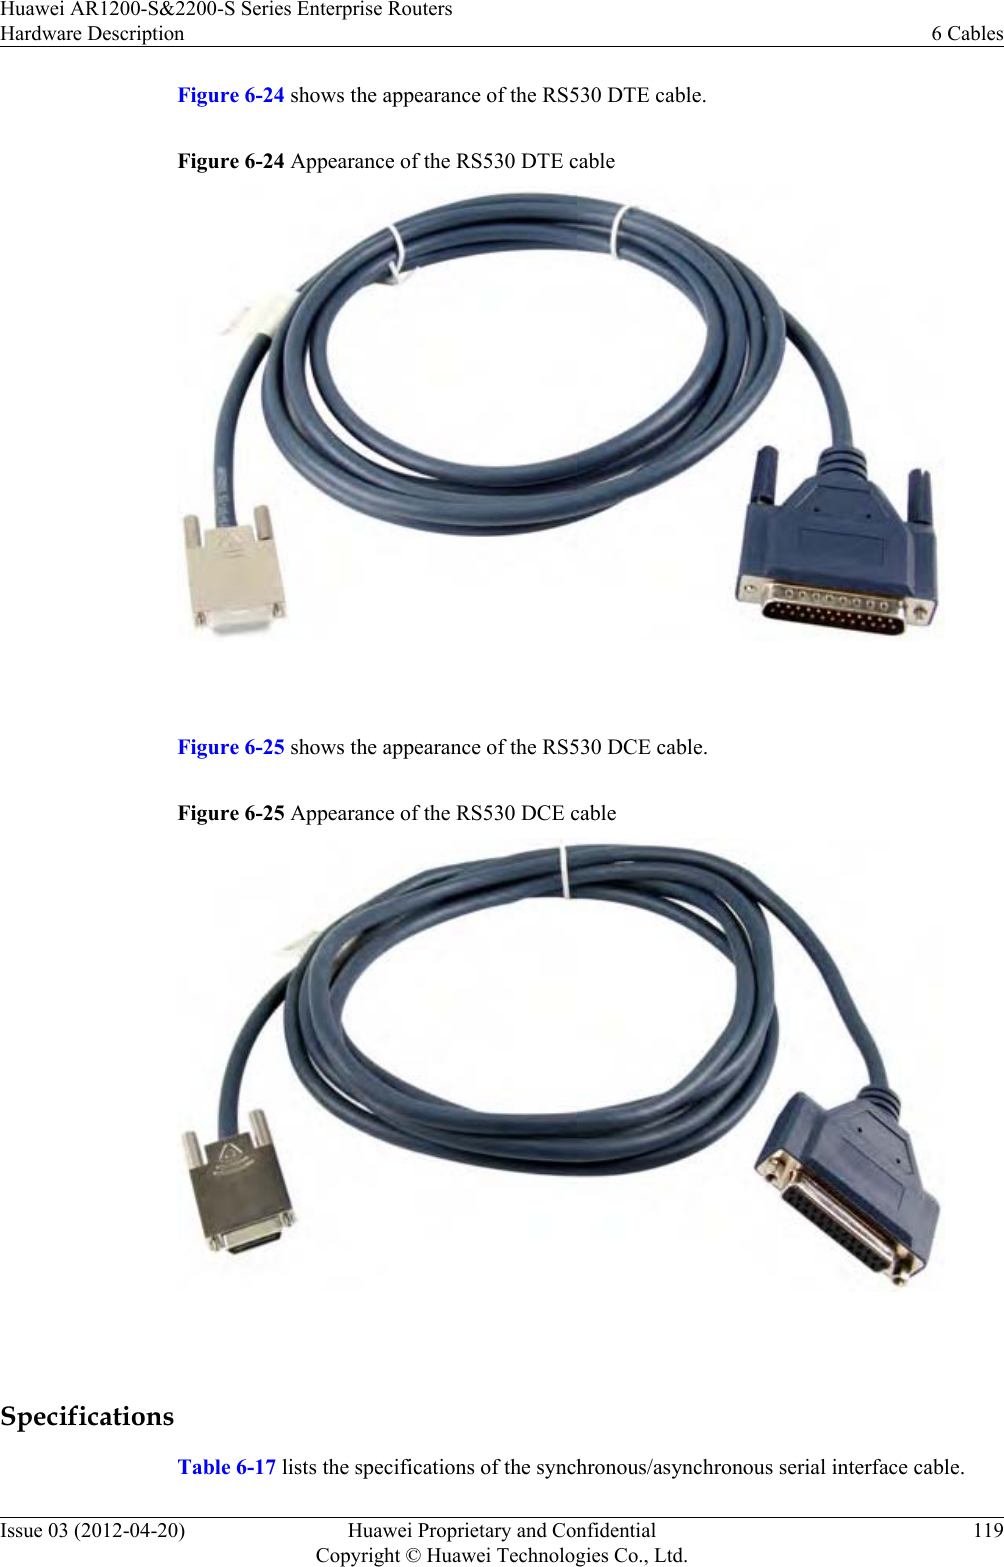 Figure 6-24 shows the appearance of the RS530 DTE cable.Figure 6-24 Appearance of the RS530 DTE cable Figure 6-25 shows the appearance of the RS530 DCE cable.Figure 6-25 Appearance of the RS530 DCE cable SpecificationsTable 6-17 lists the specifications of the synchronous/asynchronous serial interface cable.Huawei AR1200-S&amp;2200-S Series Enterprise RoutersHardware Description 6 CablesIssue 03 (2012-04-20) Huawei Proprietary and ConfidentialCopyright © Huawei Technologies Co., Ltd.119